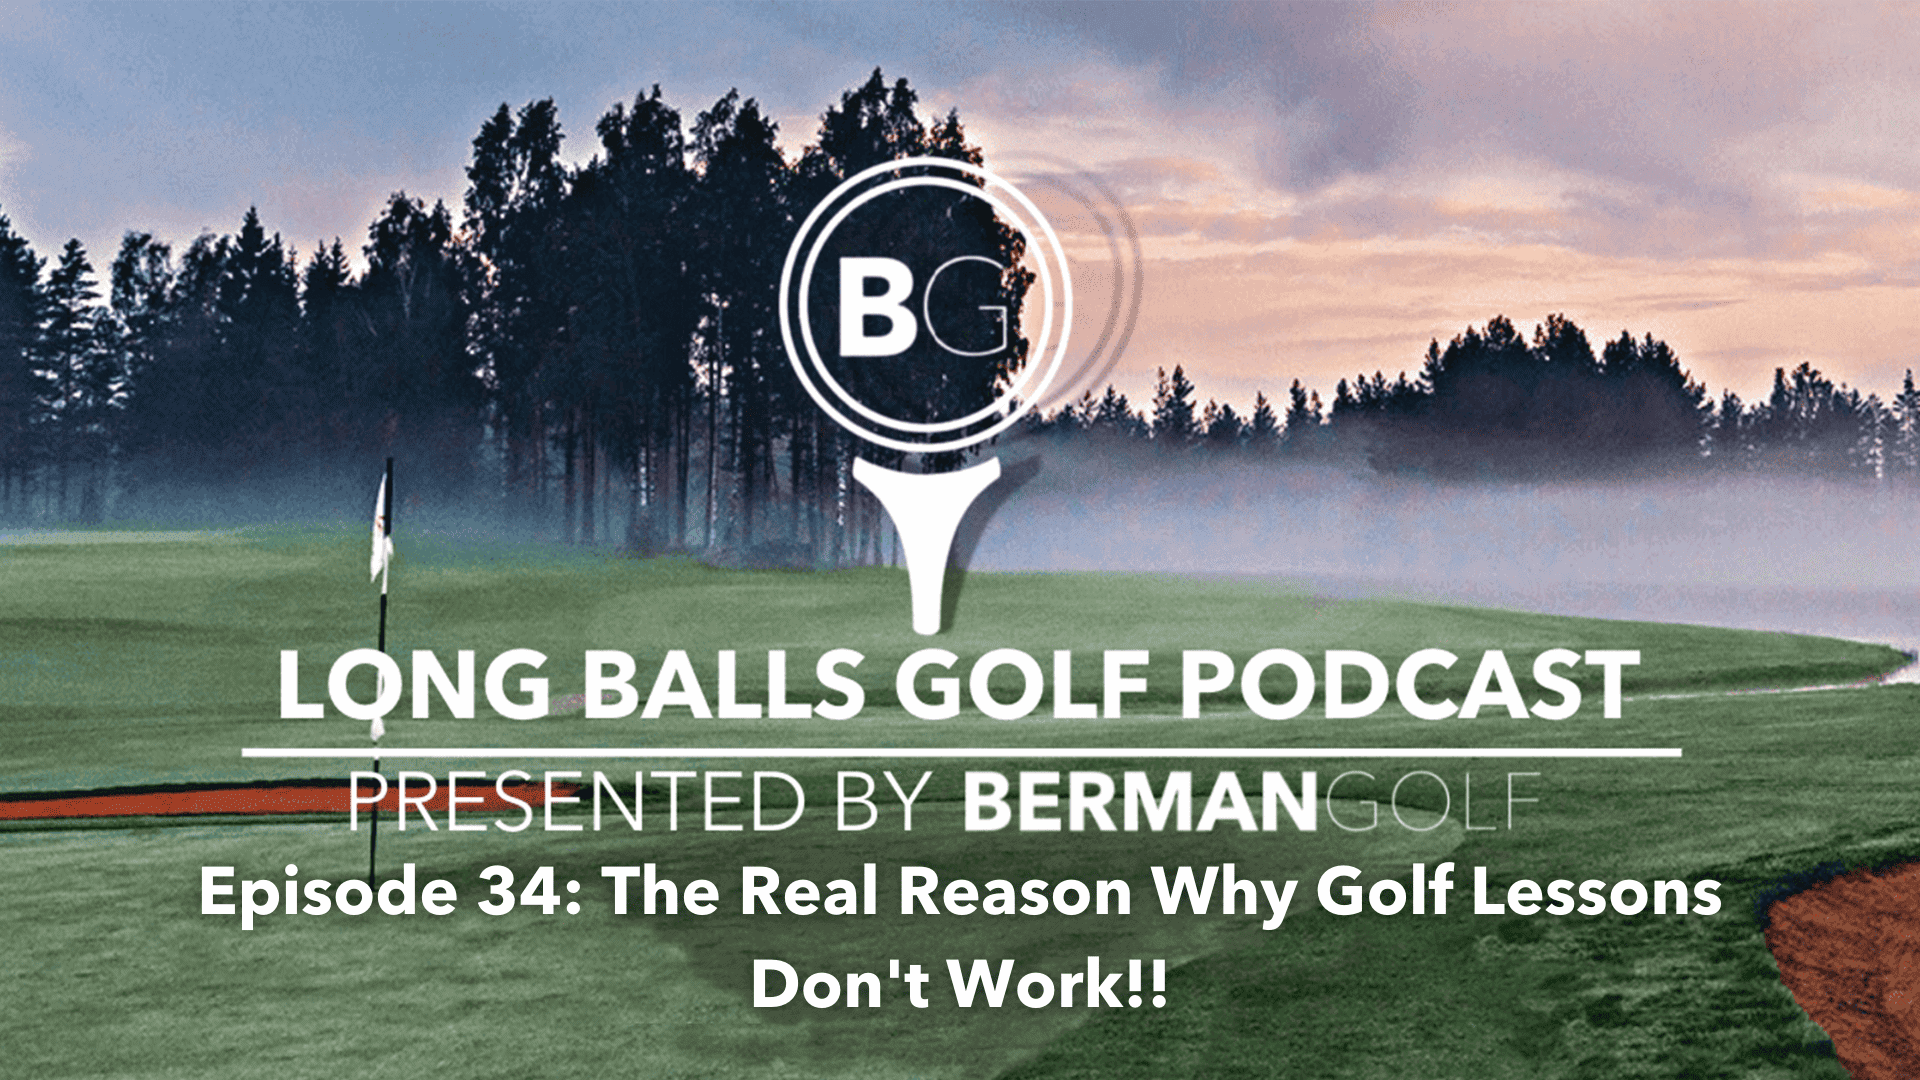 Episode 34: The Real Reason Why Golf Lessons Don’t Work!